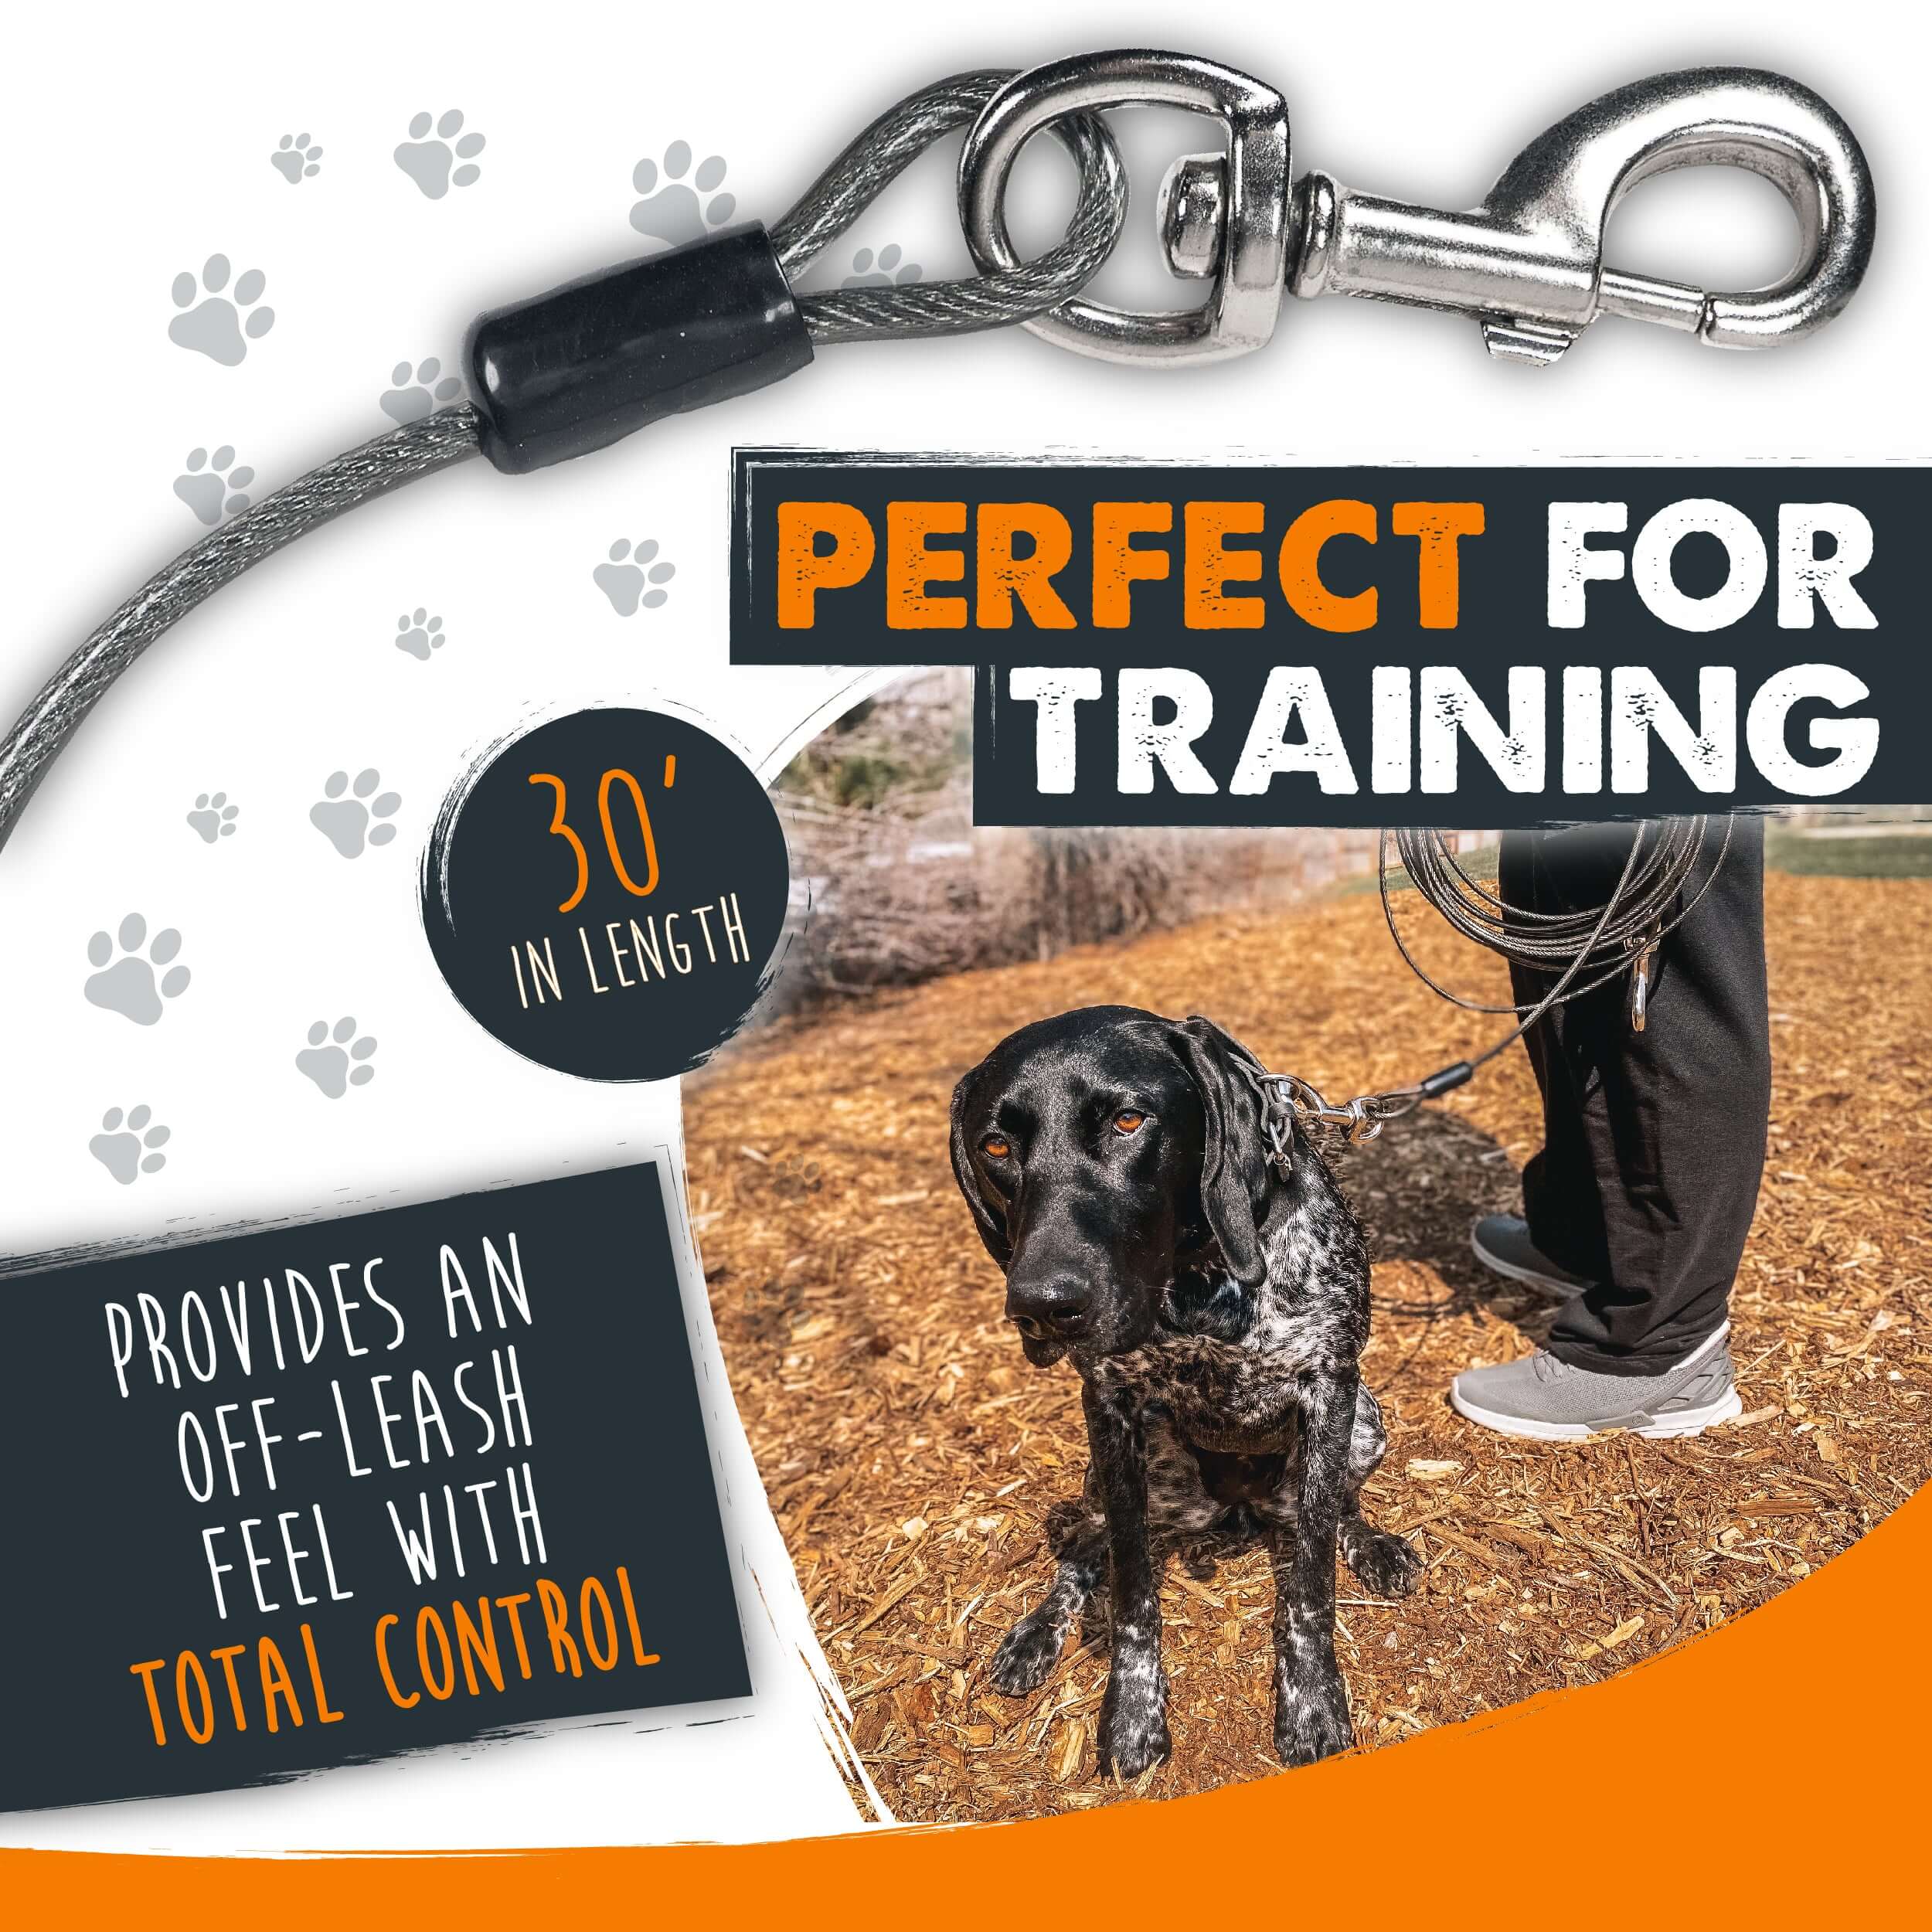 Mighty Paw 30' Reflective Tie Out Cable Leash